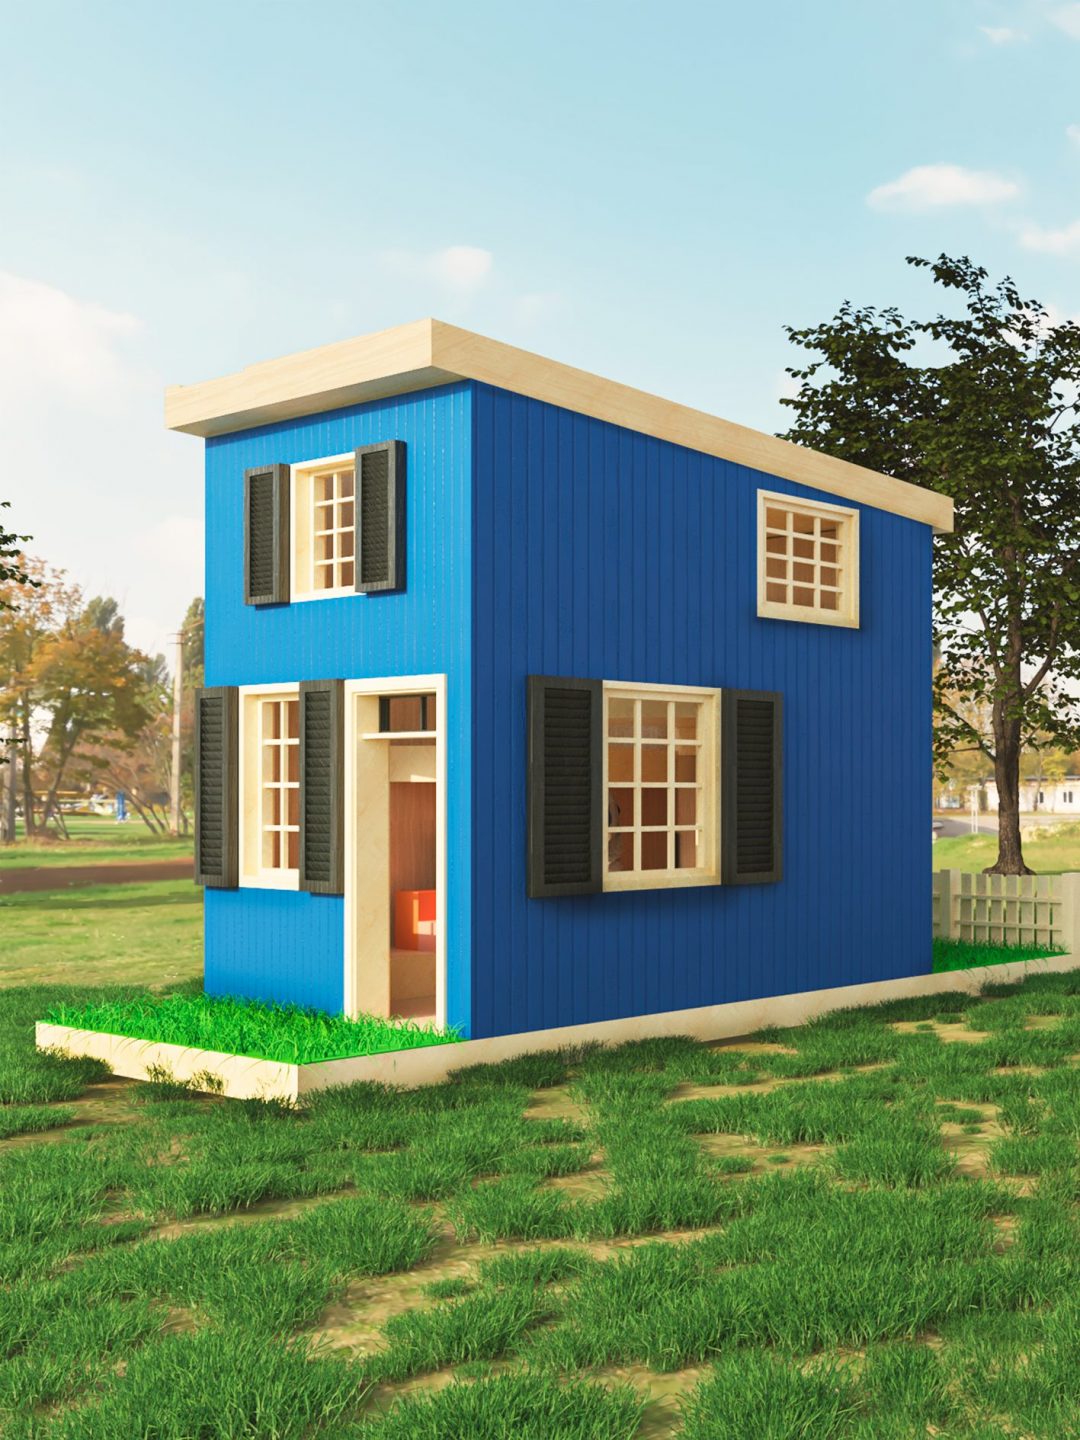 rendering of a blue children's playhouse in a field